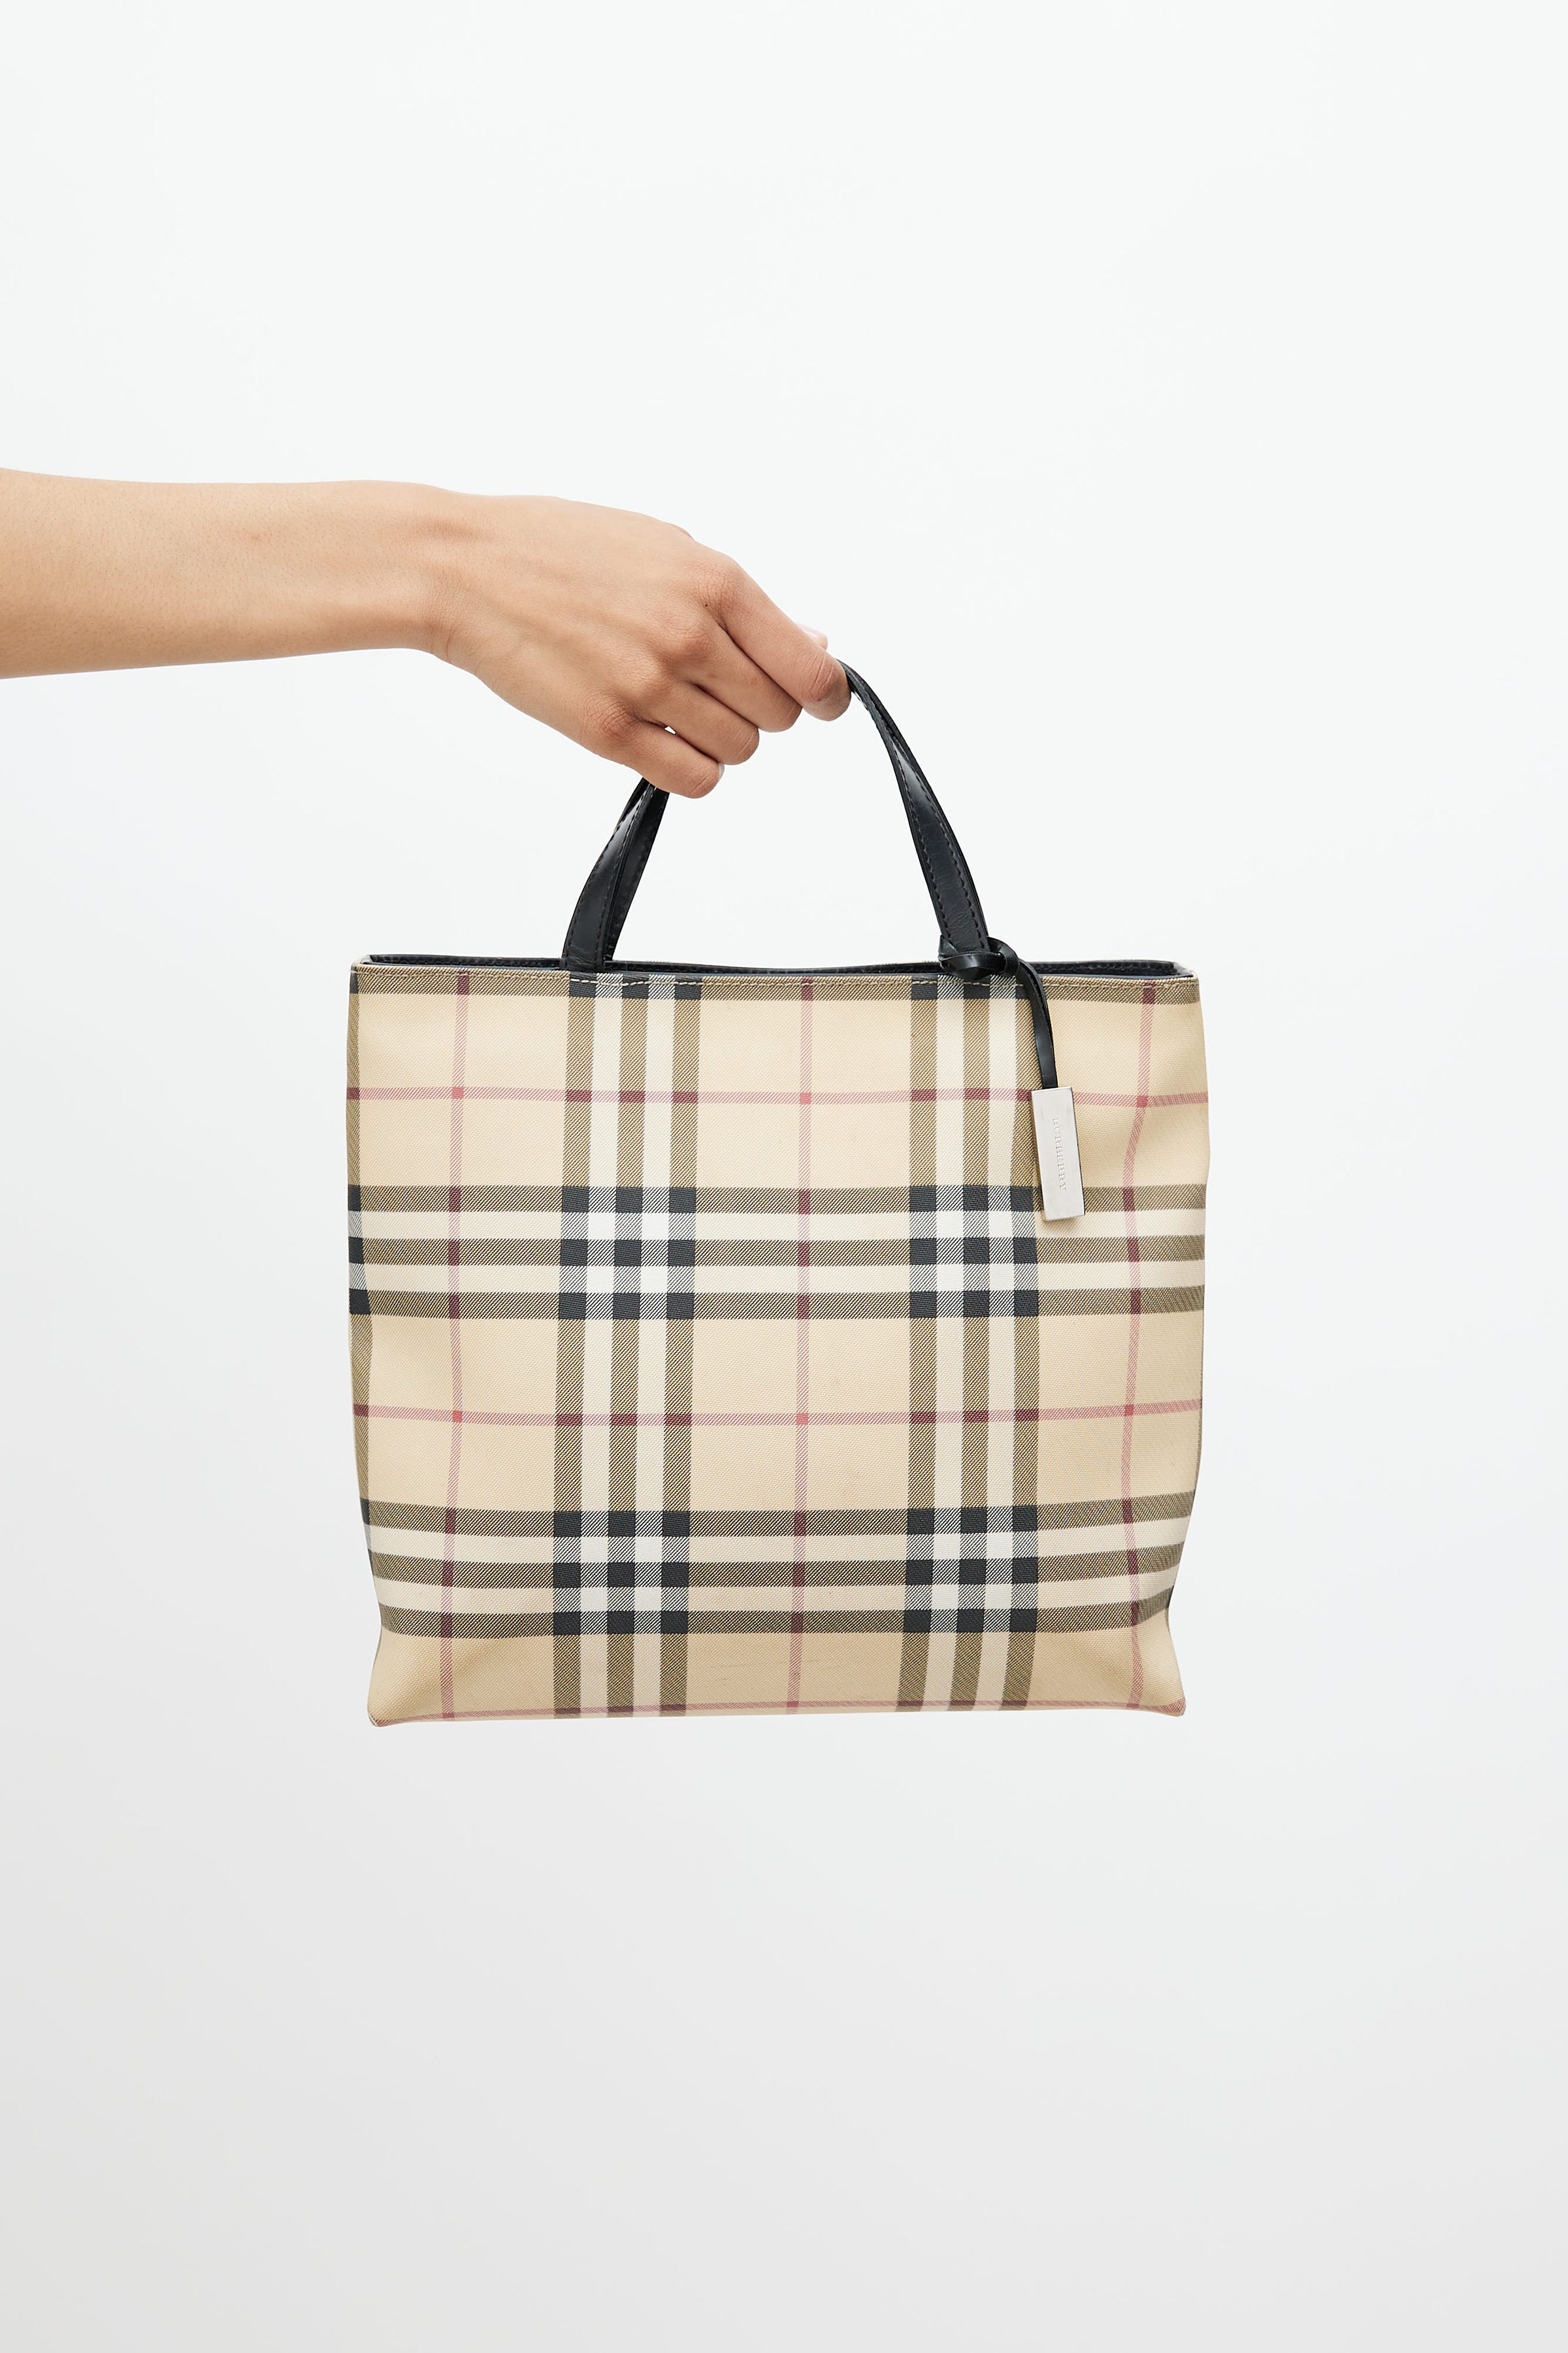 Best Like New Authentic Burberry Tote for sale in Calgary, Alberta for 2023